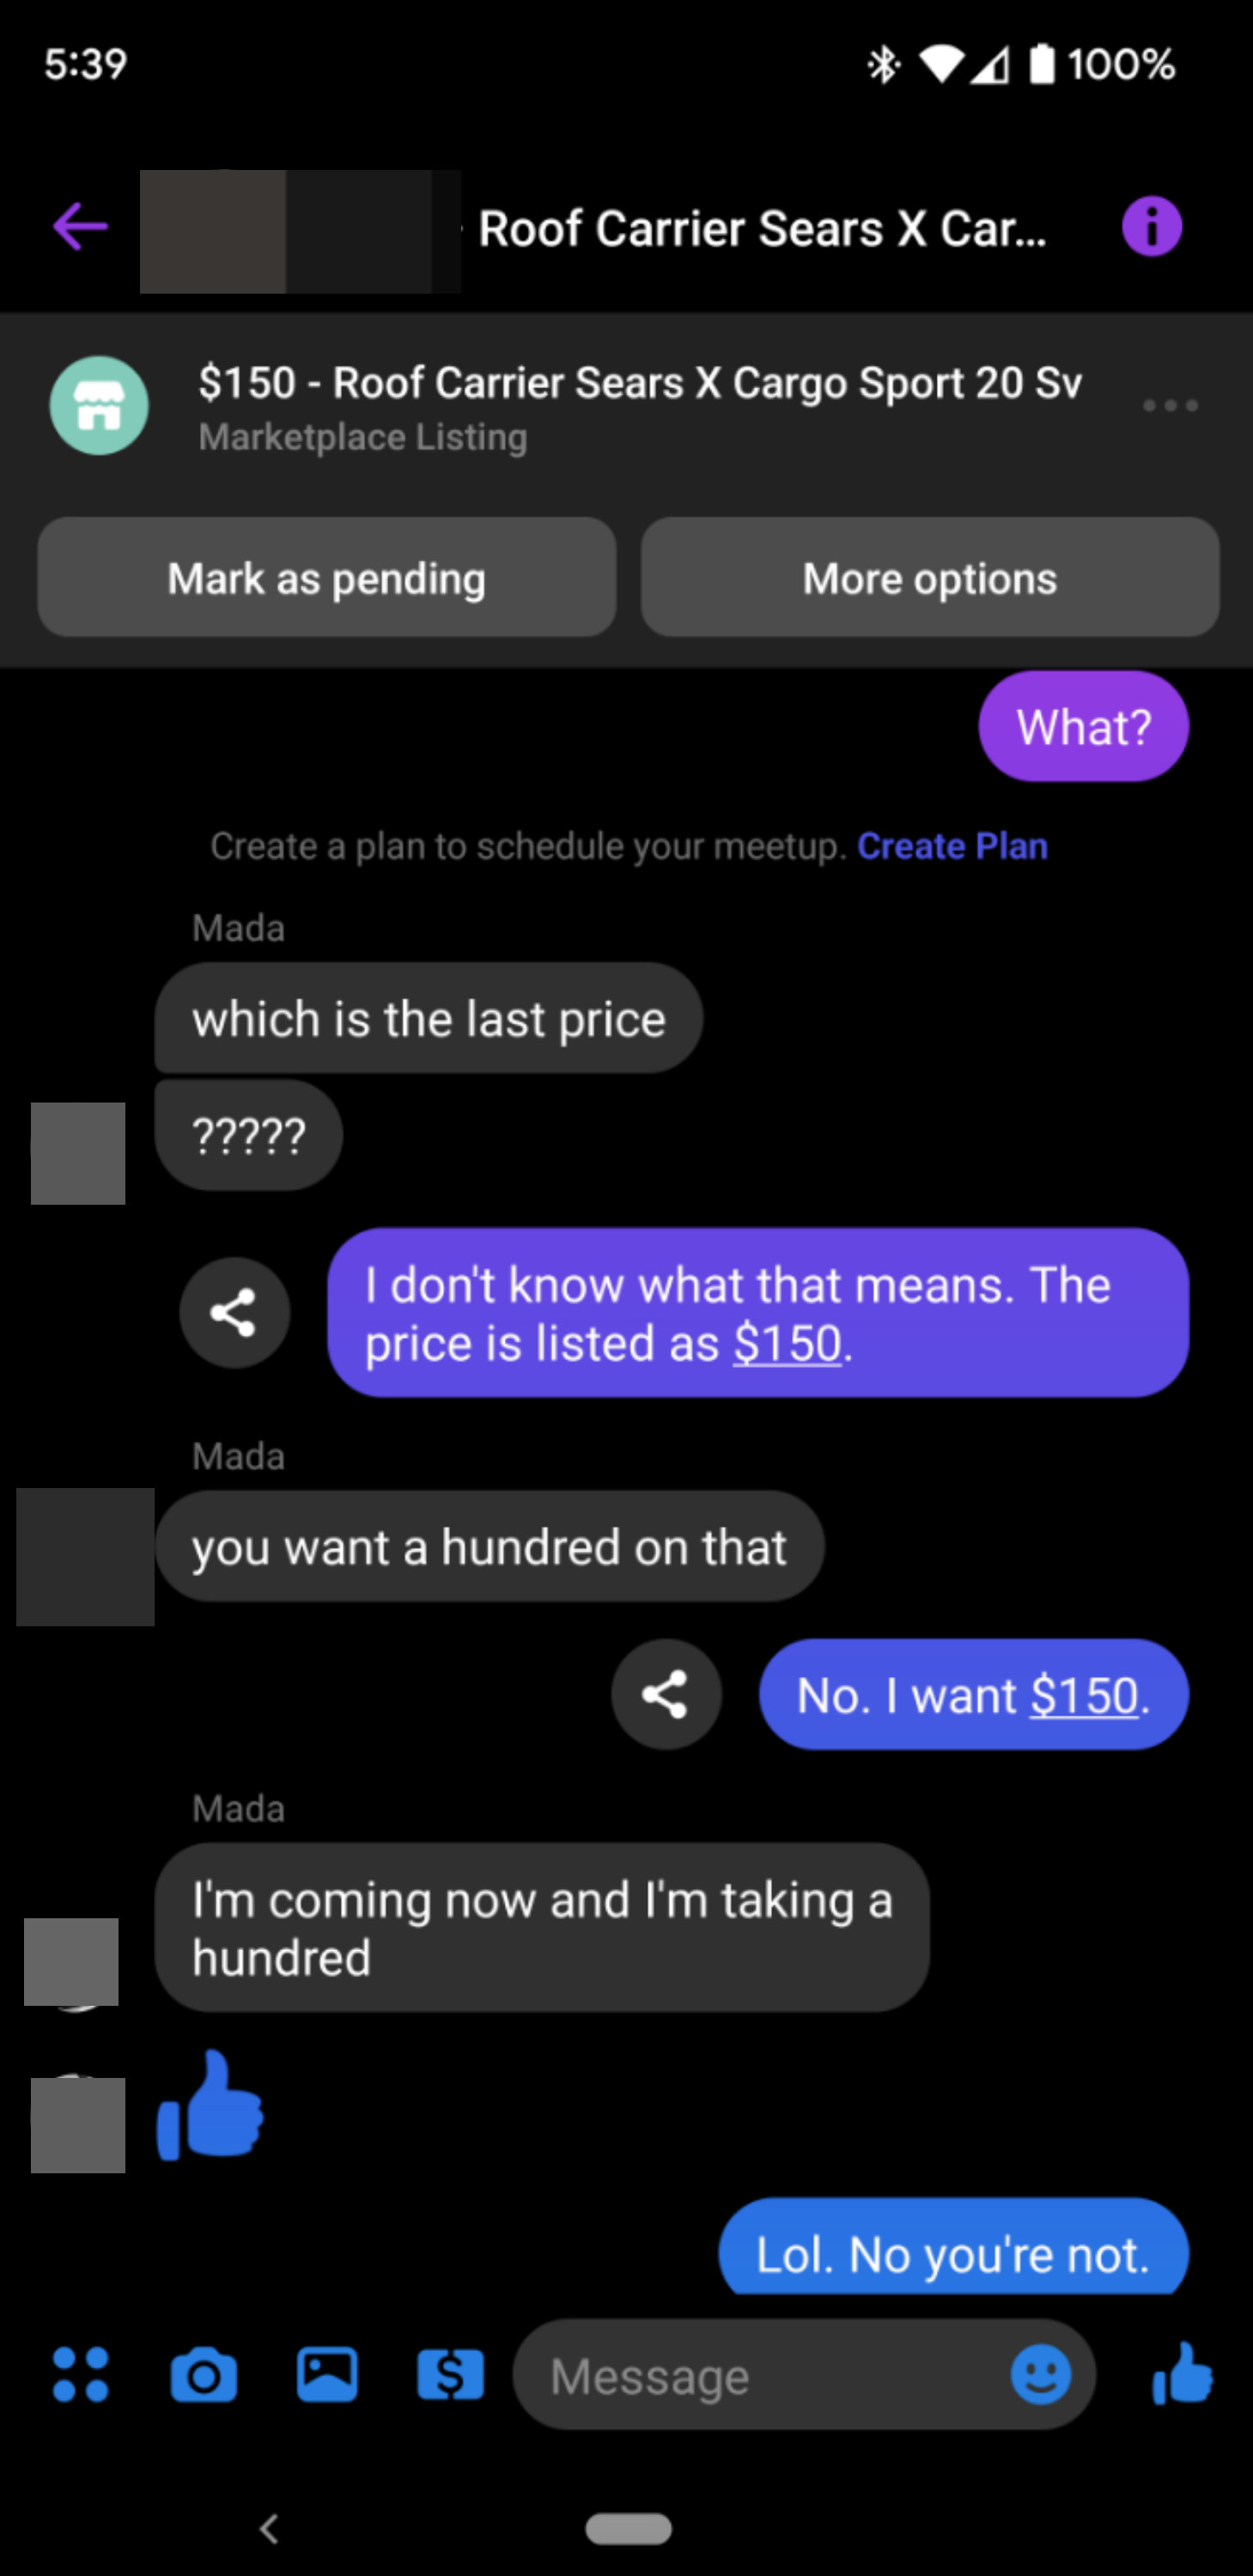 Seller says they don&#x27;t know what that means and the listed price is $150, then buyer says &quot;You want $100 on that?&quot; and seller says &quot;No, $150,&quot; and buyer says I&#x27;m coming now and I&#x27;m taking $100&quot; and seller says &quot;LOL, no you&#x27;re not&quot;